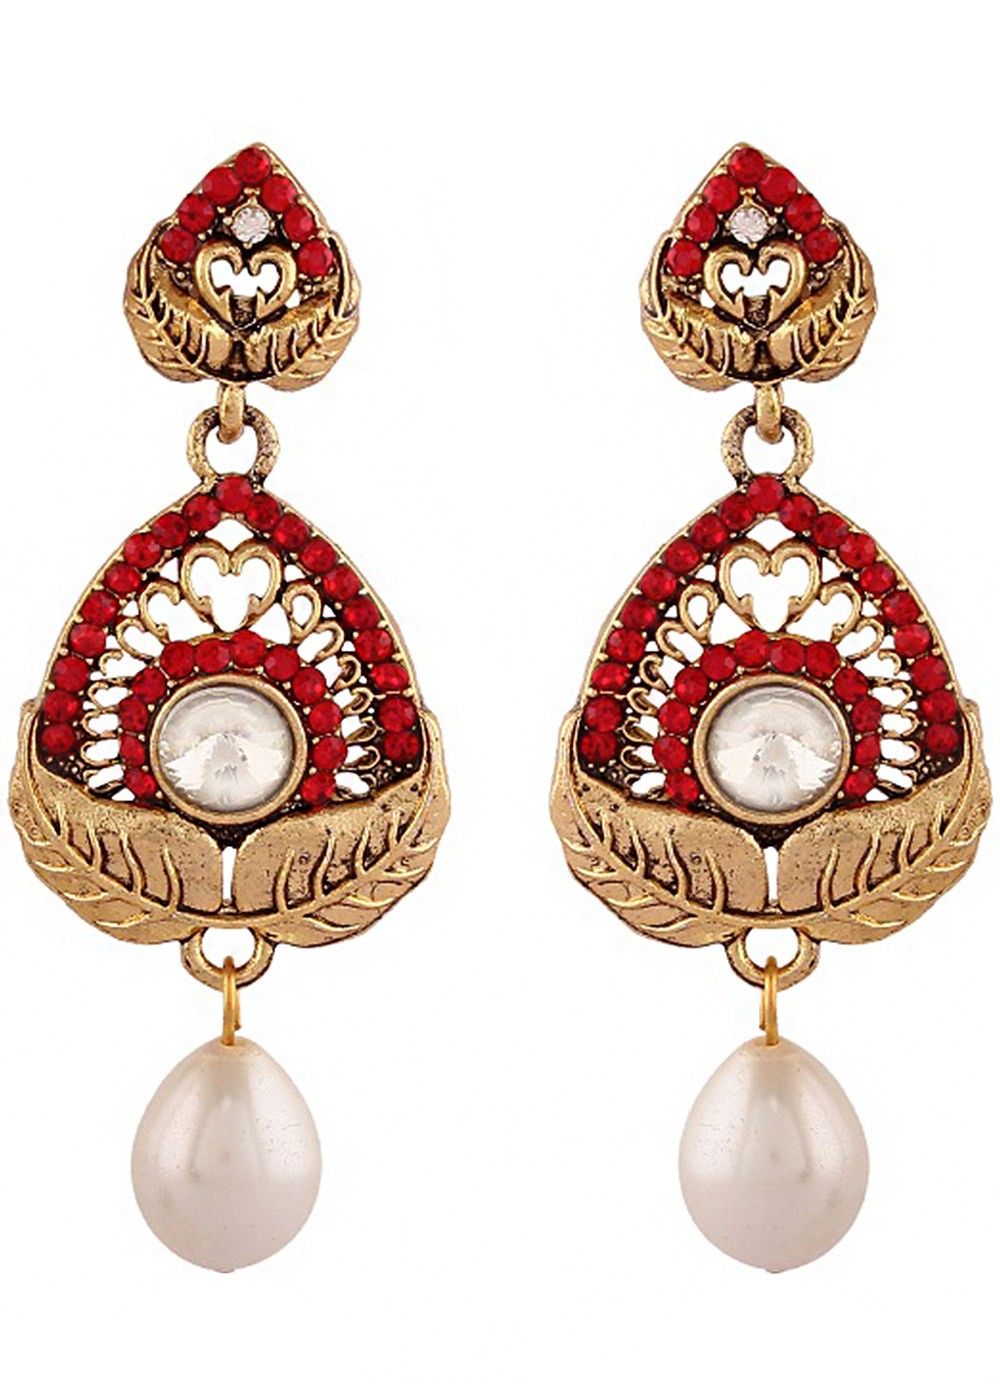 The Mystery Lady Statement Golden Earrings Rufous Red